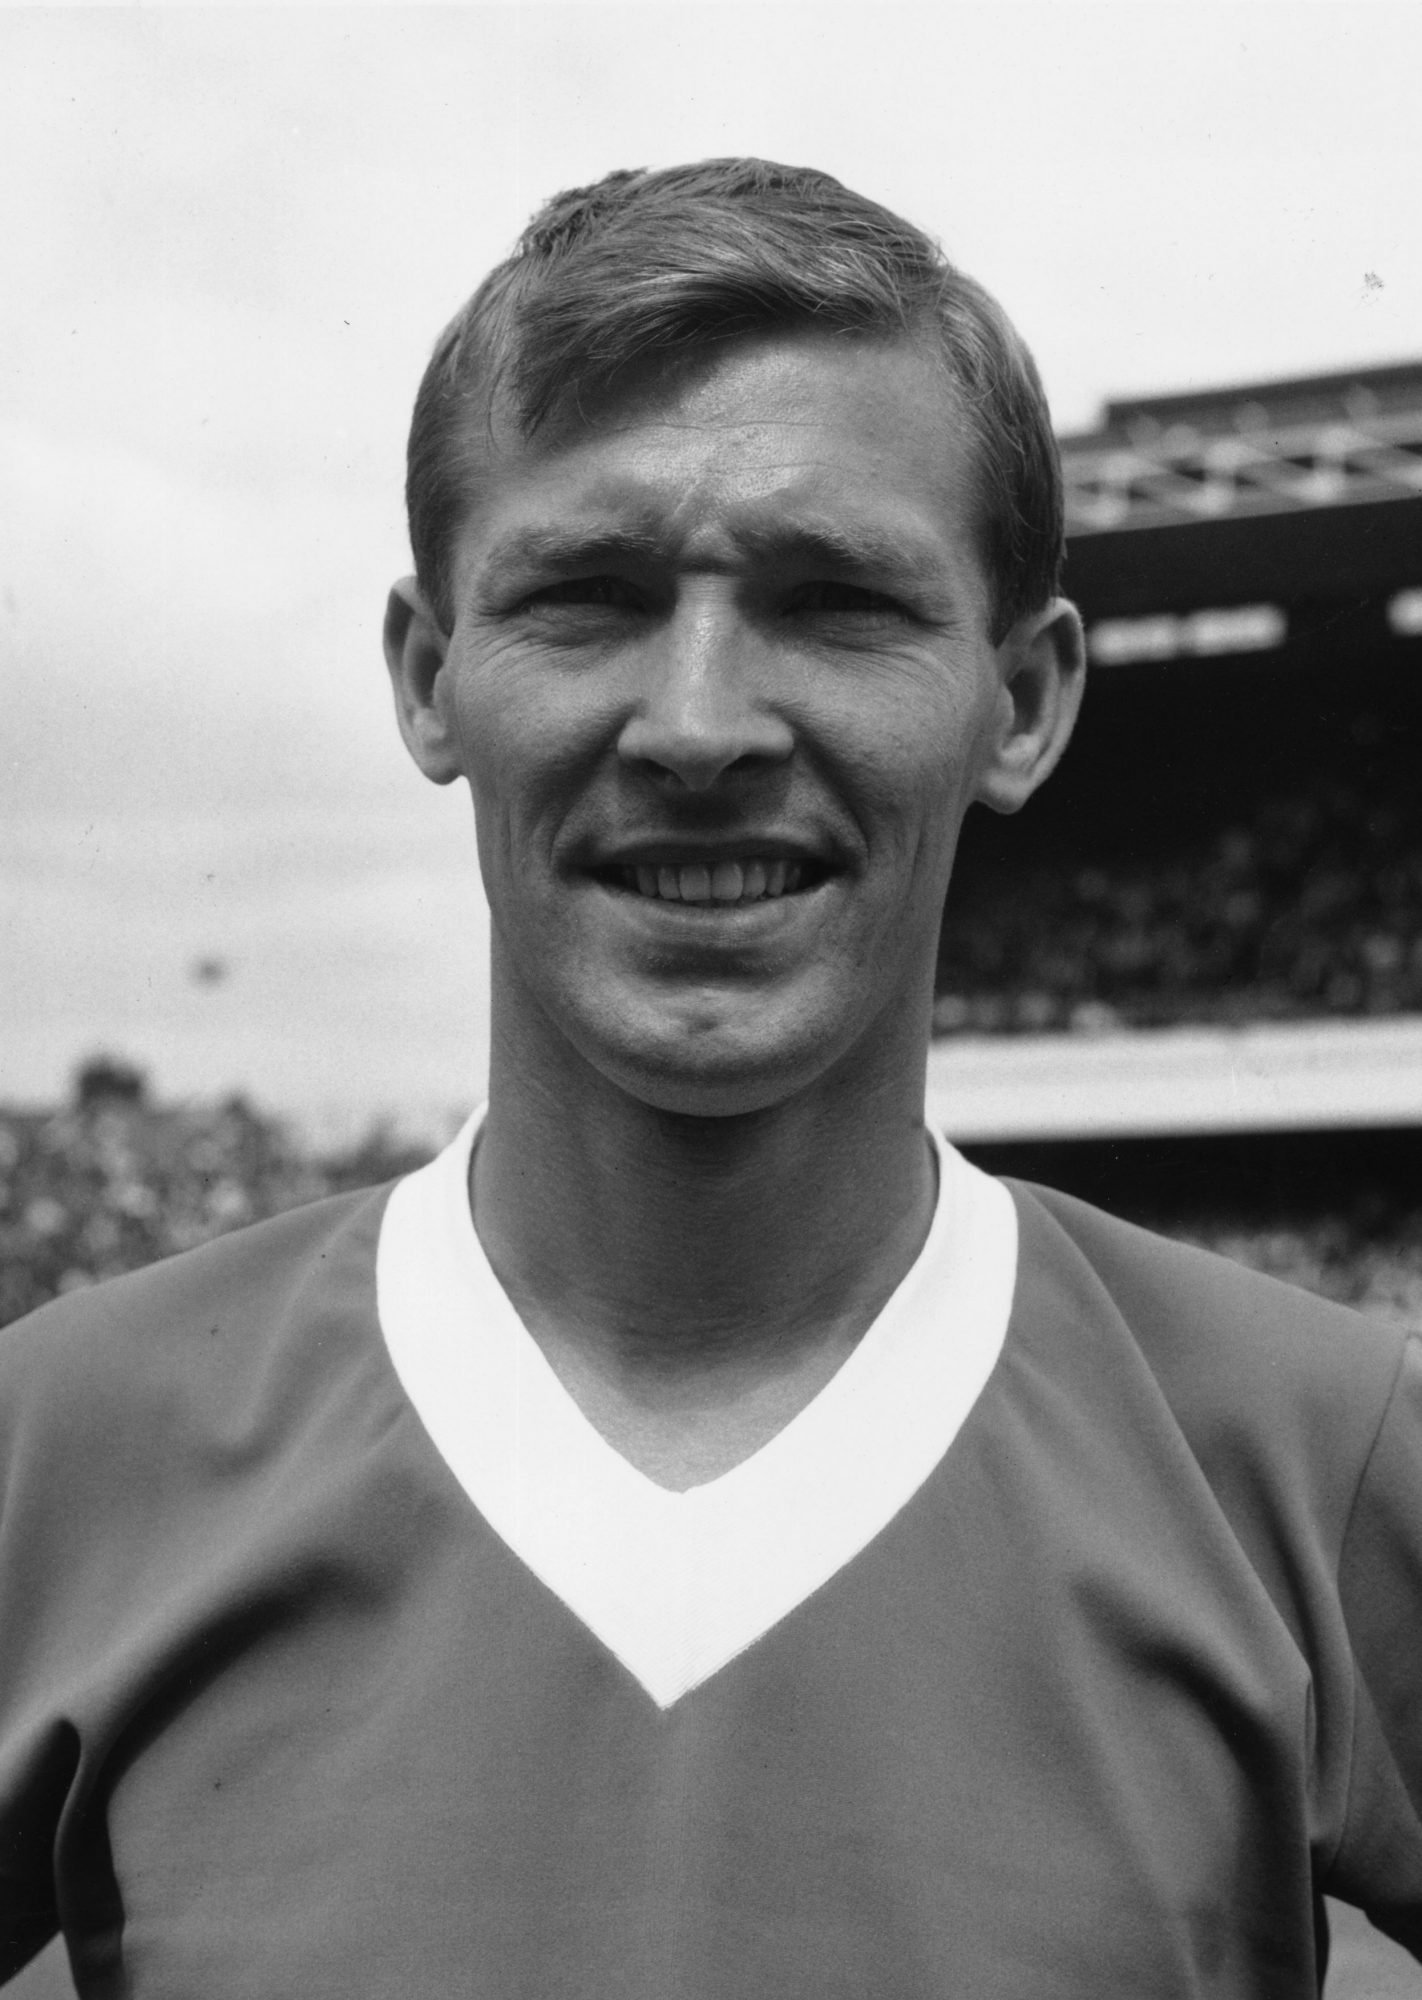 9th August 1967: Footballer Alex Ferguson, Glasgow Rangers' newly-signed centre forward who cost Â£65,000. Ferguson was born in Govan, Glasgow, and his first club was Queen's Park who he signed for in 1958. He moved to Falkirk in 1969 as a player/coach and took on this role at several clubs in Scotland before retiring as a player in 1975. He managed Aberdeen to the Scottish League title, European Cup victory and won both Scottish knock-out cup competitions (1986) before moving to Manchester United to become a successful manager in the First Division and Premier League. He was also the caretaker manager of the Scottish national side after Jock Stein's death in 1985. (Photo by Central Press/Getty Images)